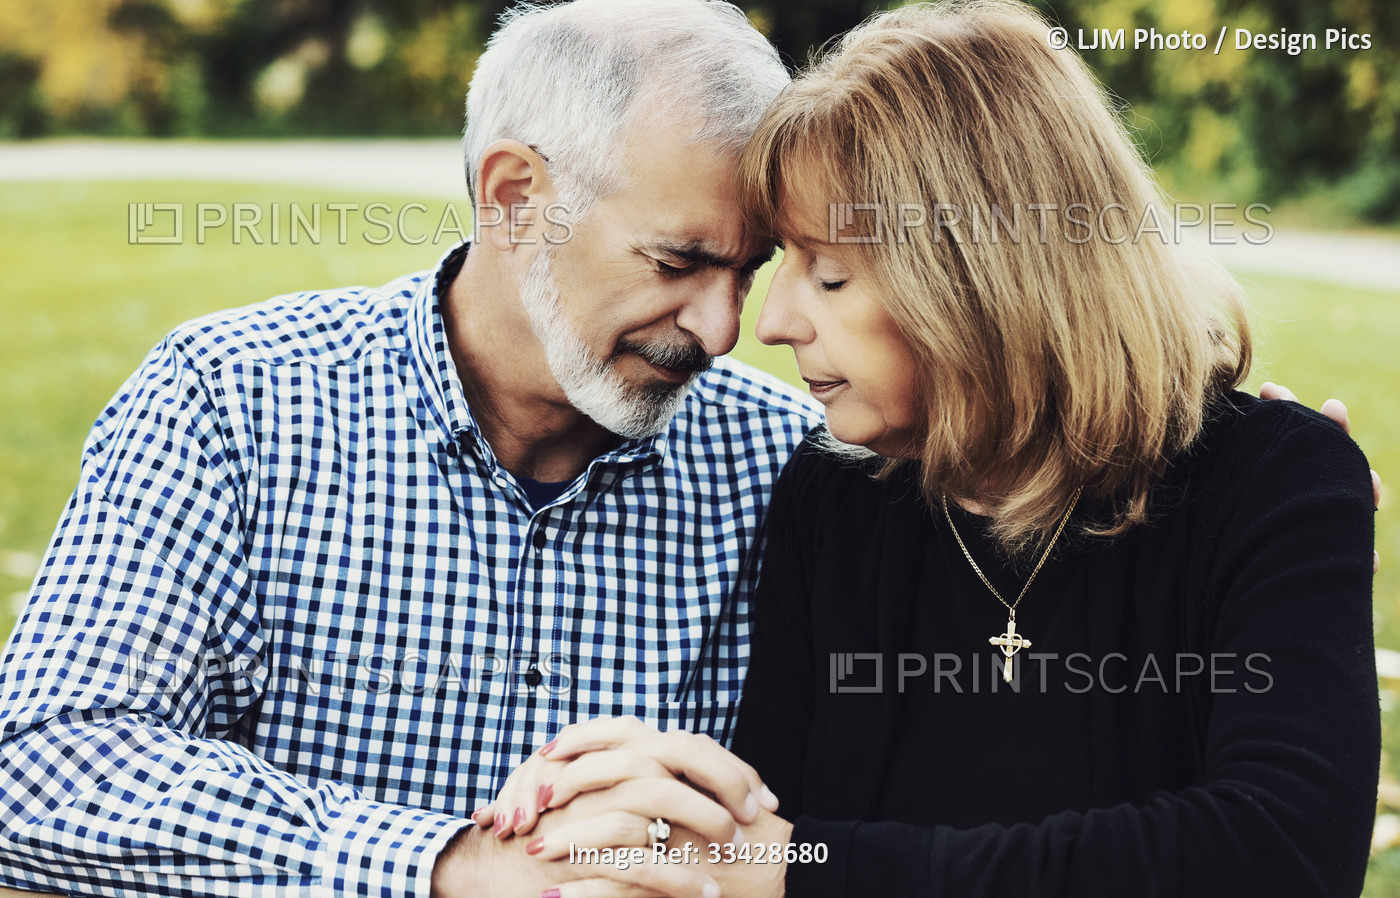 A mature couple sharing devotional time together by studying the Bible and ...